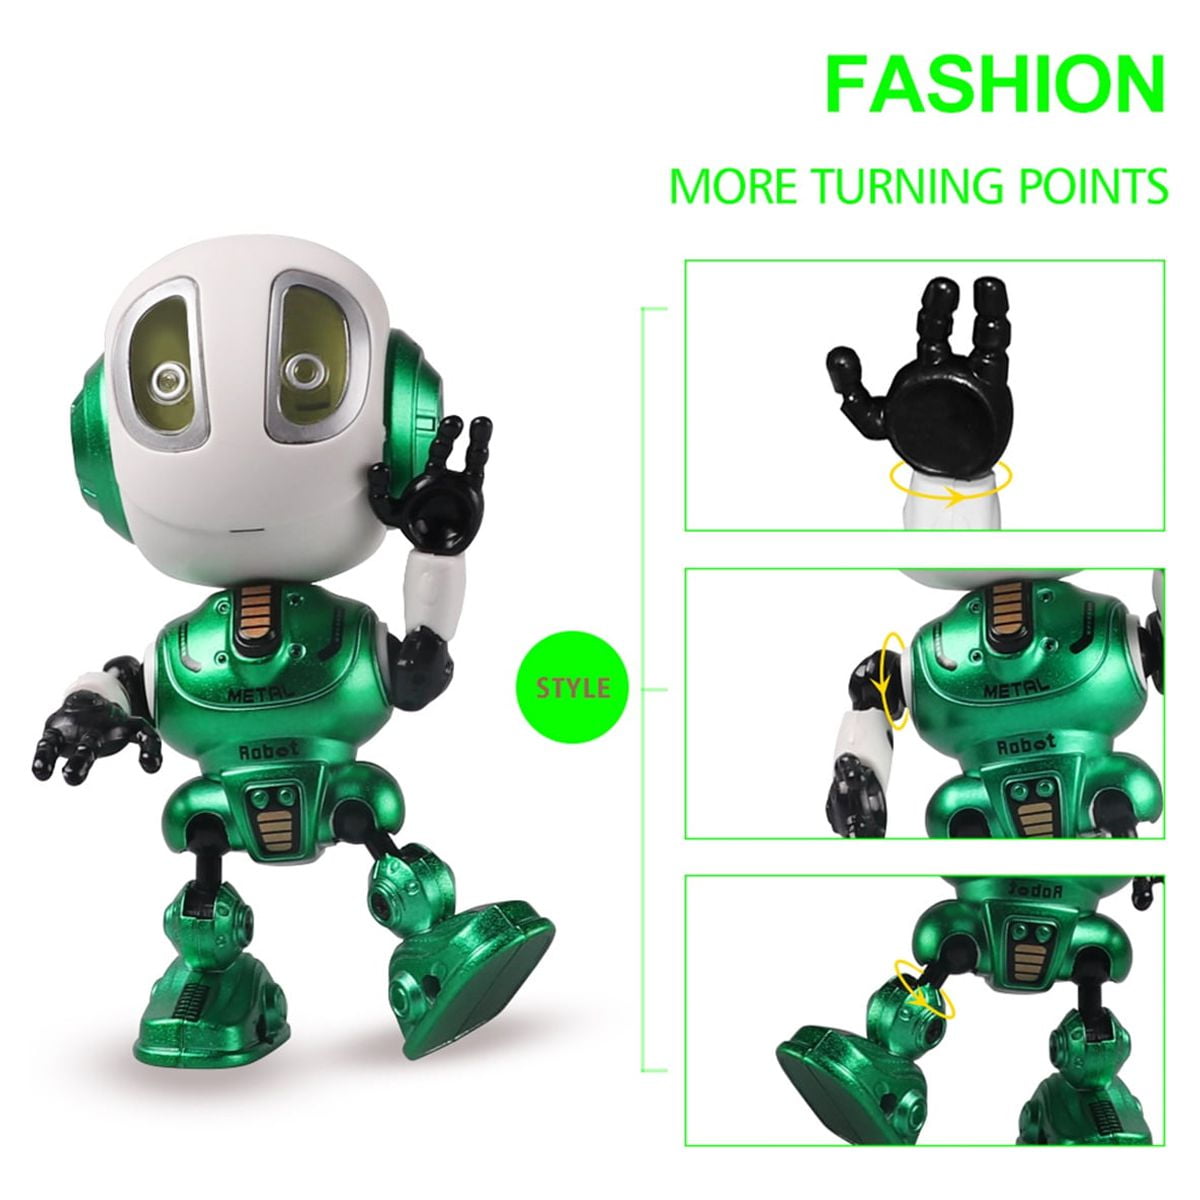 Listening Speaking Alive Robot Kids From 3 To 5 Years Old With Flashing  Eyes, Small Fun Lovely Metal Robot Toys With Voice For Kids 5-7 Christmas  Birt